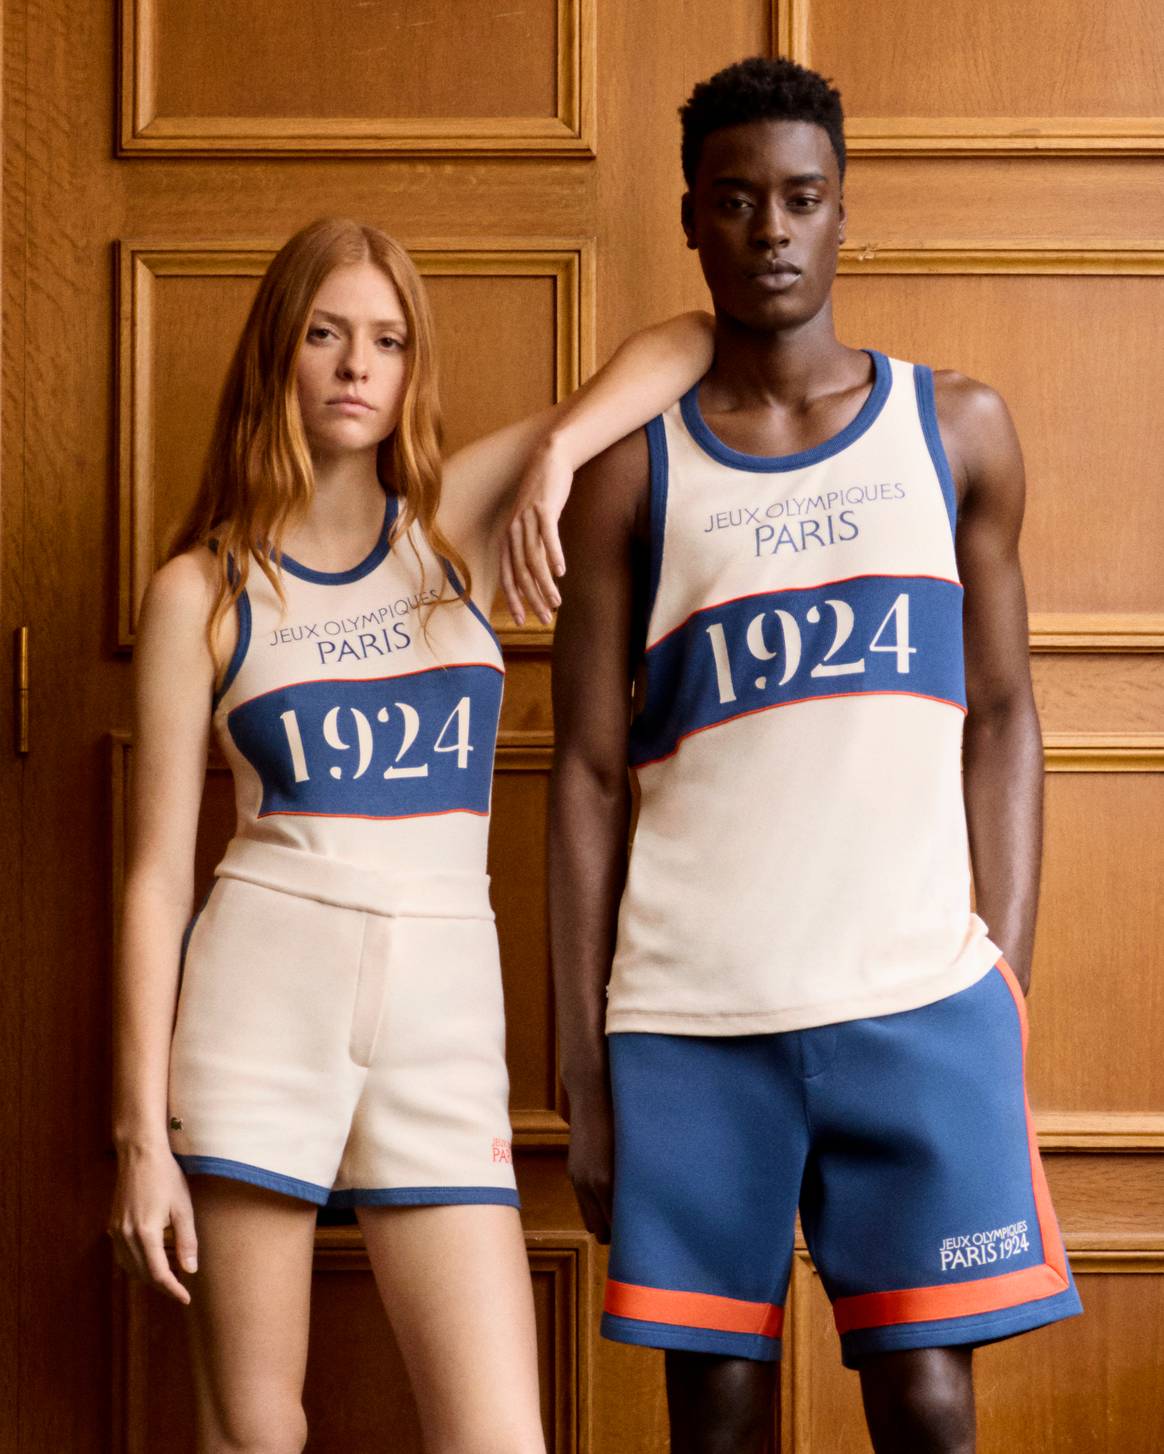 Lacoste Paris 1924 Olympic Heritage collection